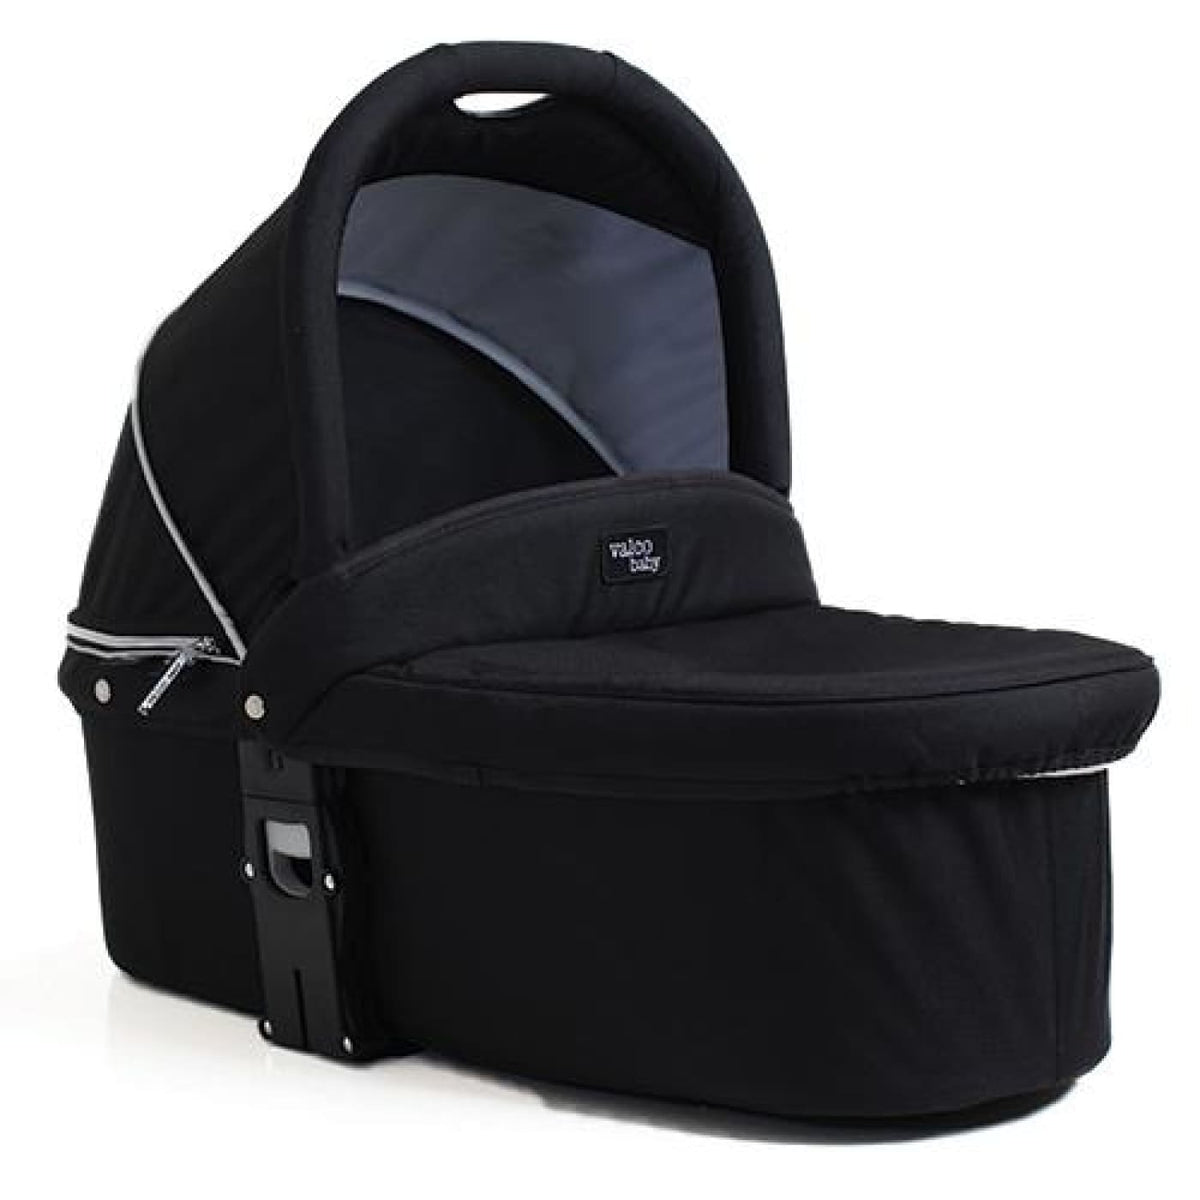 Valco Baby Q Bassinet for Snap Ultra Duo - Coal Black (ETA Unavailable) - PRAMS &amp; STROLLERS - BASS/CARRY COTS/STANDS